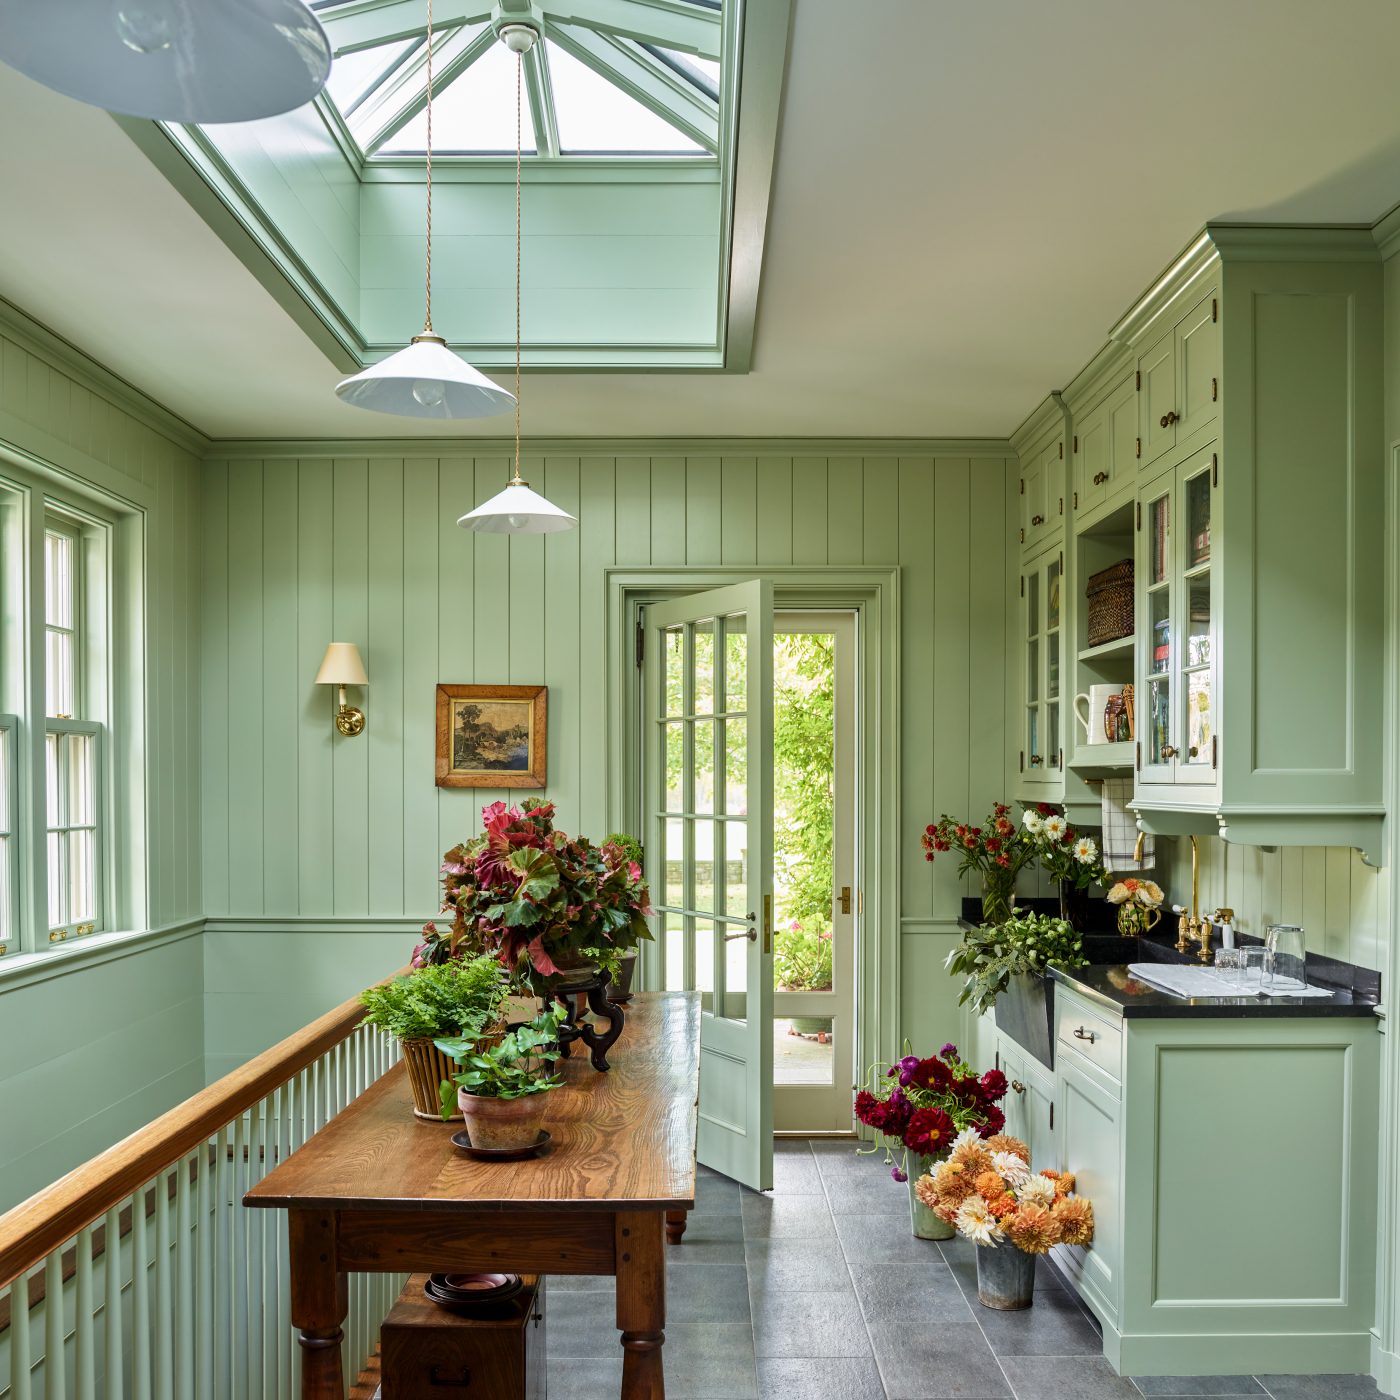 Skylit green mudroom in Dutchess County New York Regency-style home by Gil Schafer III in his new book Home at Last: Enduring Design for the New American Home Rizzoli publisher written with Mark Kristal